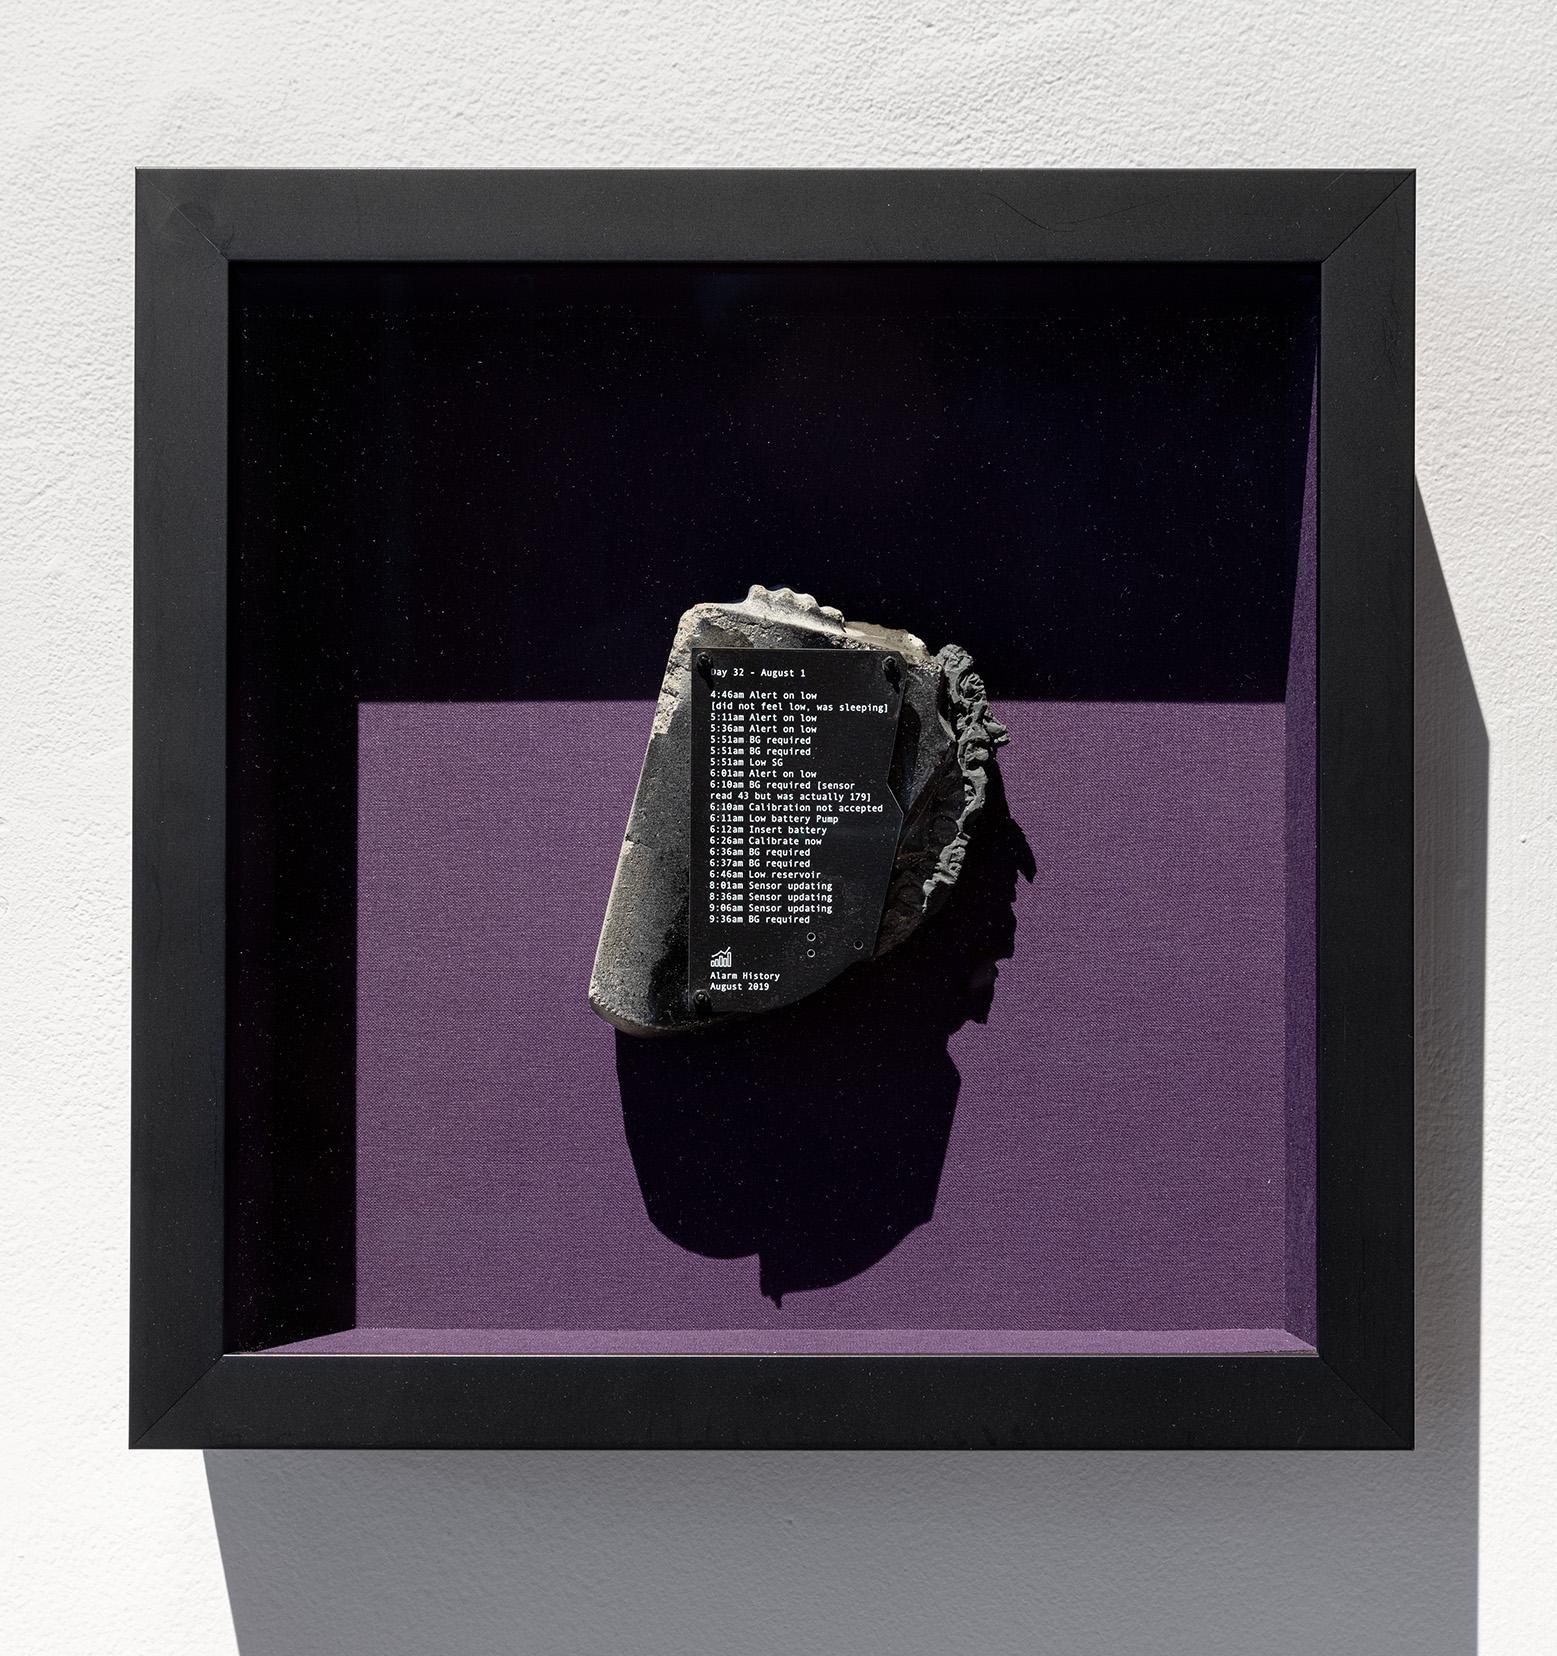 artwork of a concrete block with text on top against a mauve background encased in a black frame